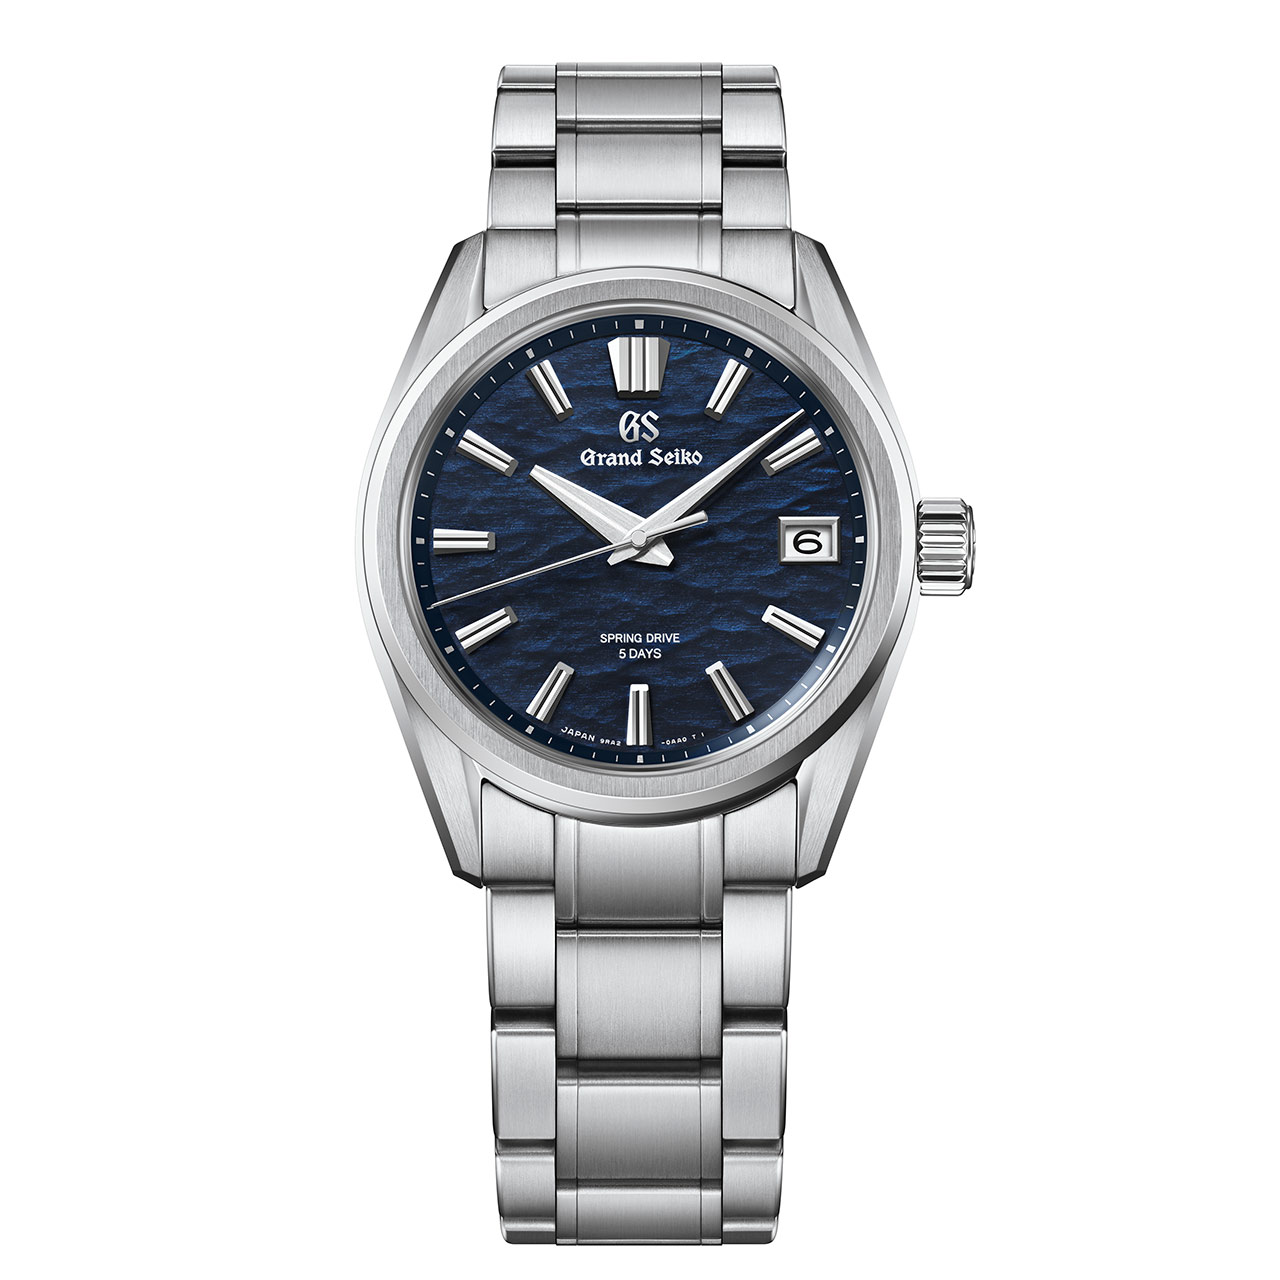 Grand Seiko - Evolution 9 Spring Drive SLGA021 | Time and Watches | The  watch blog